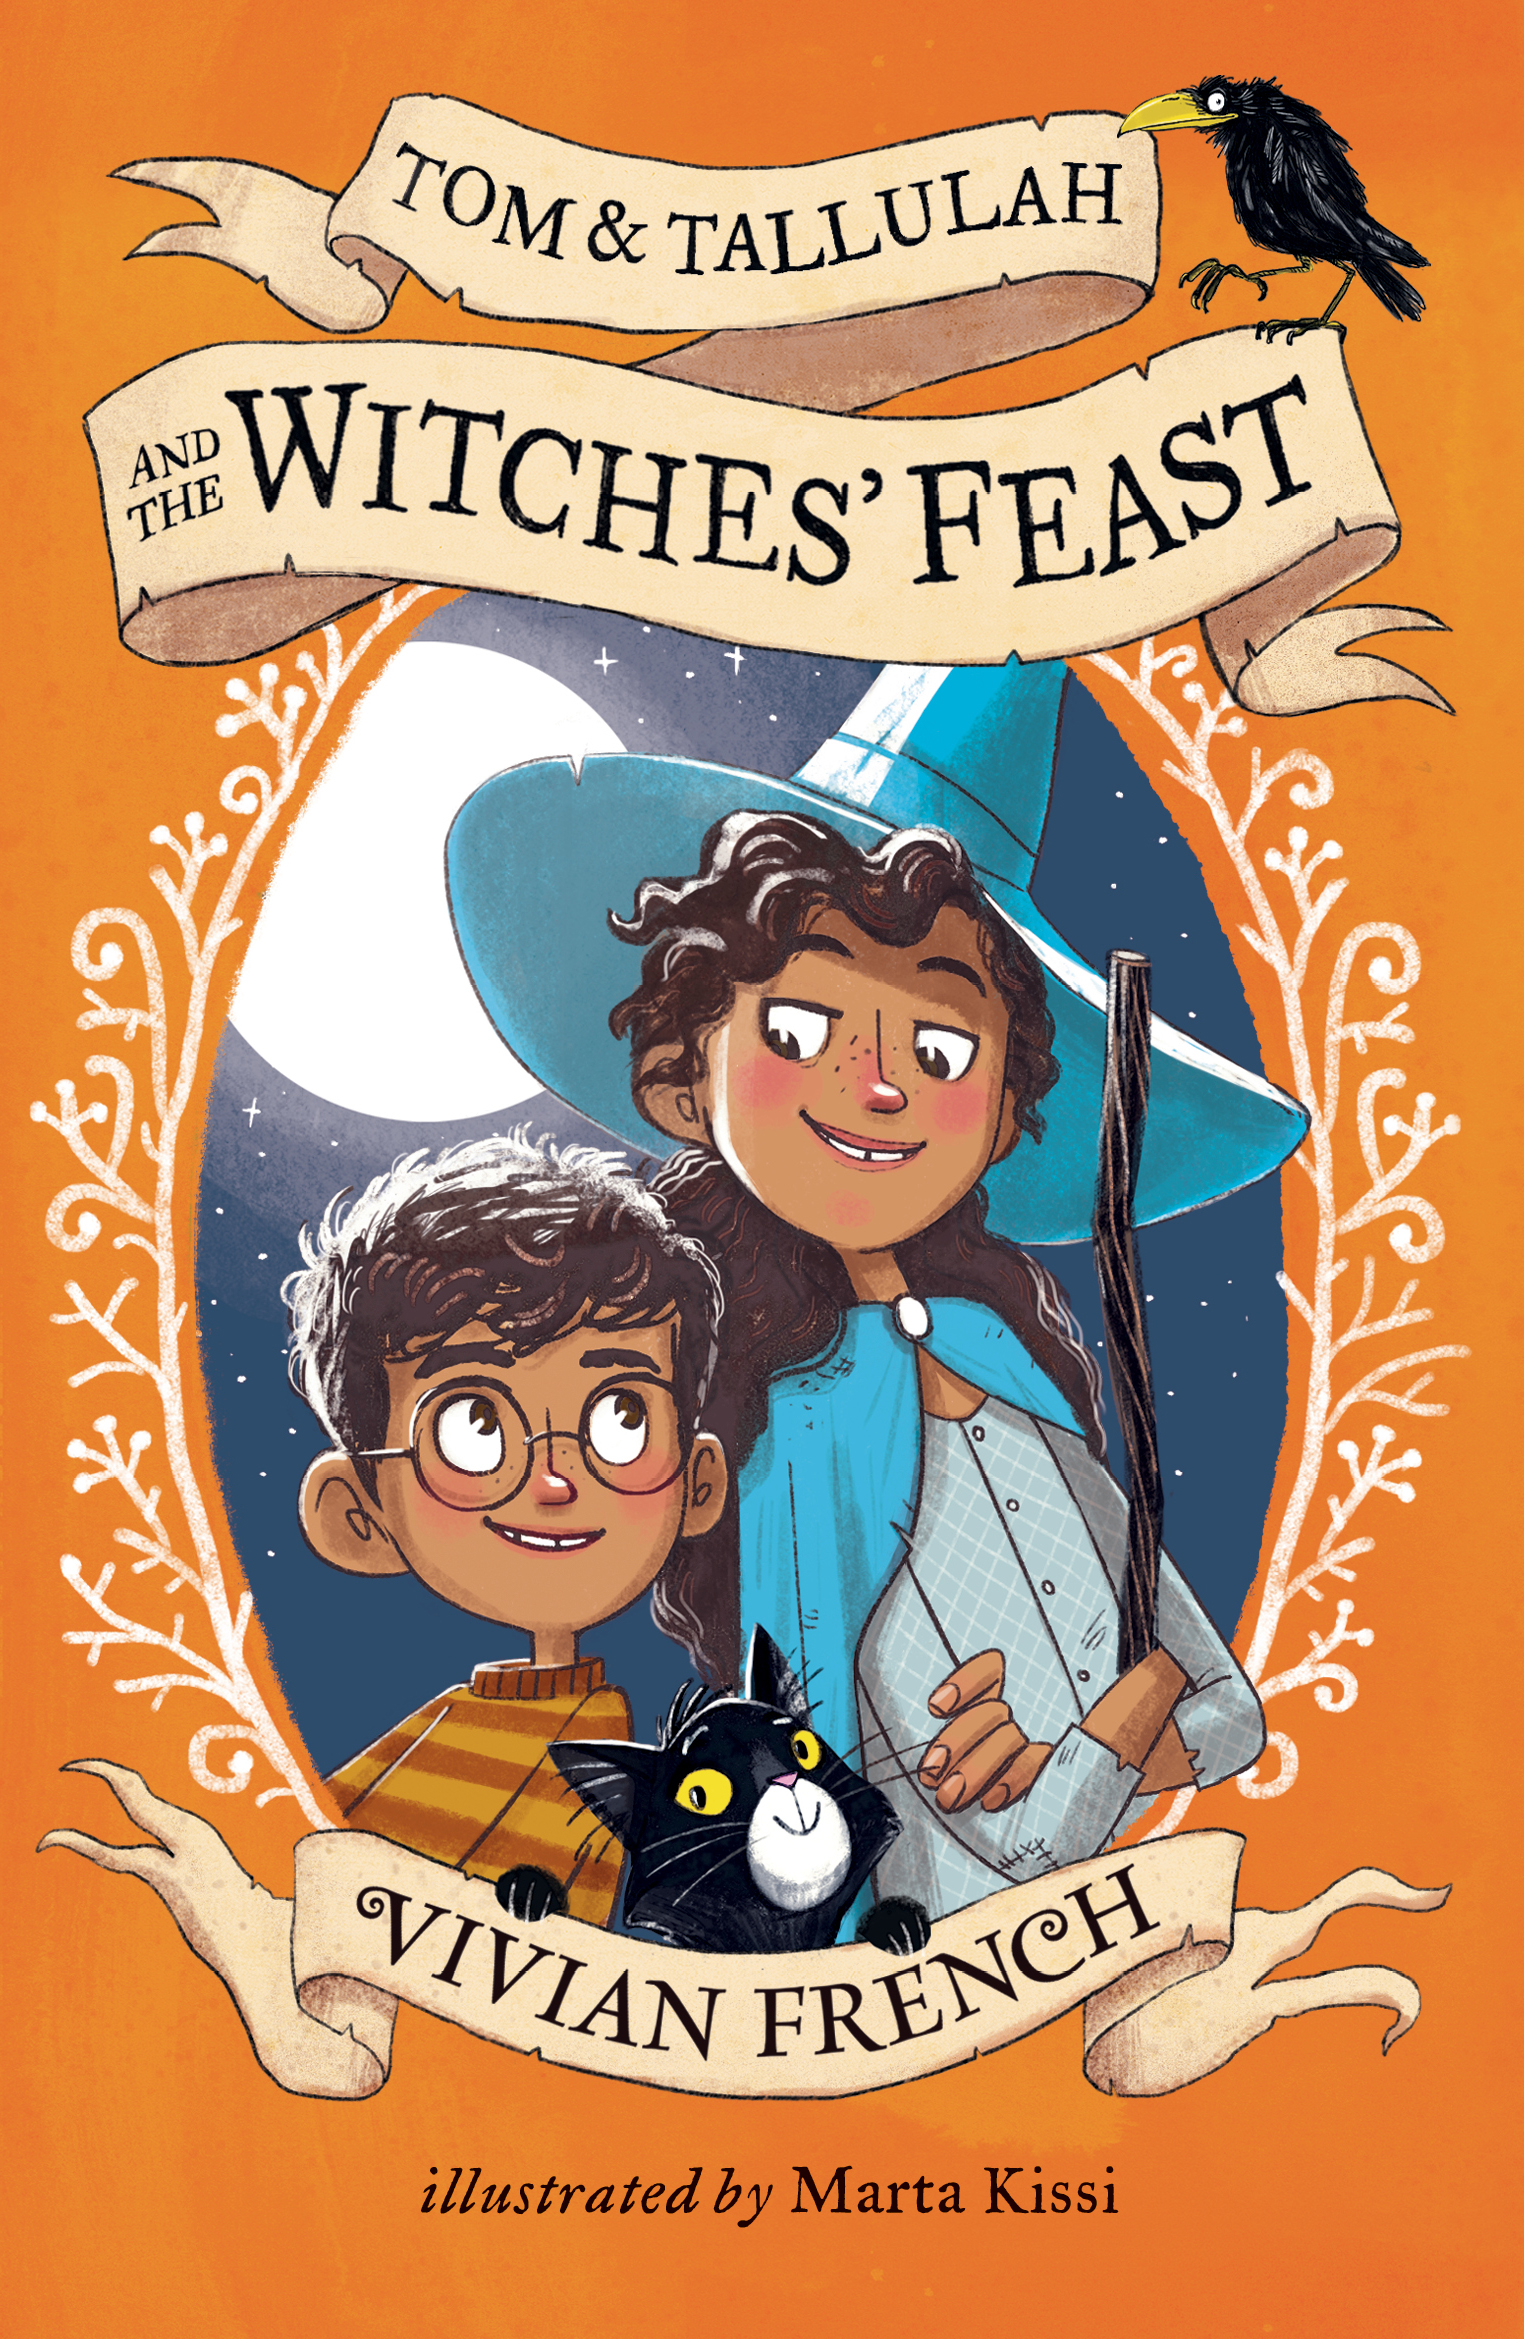 Tom-Tallulah-and-the-Witches-Feast